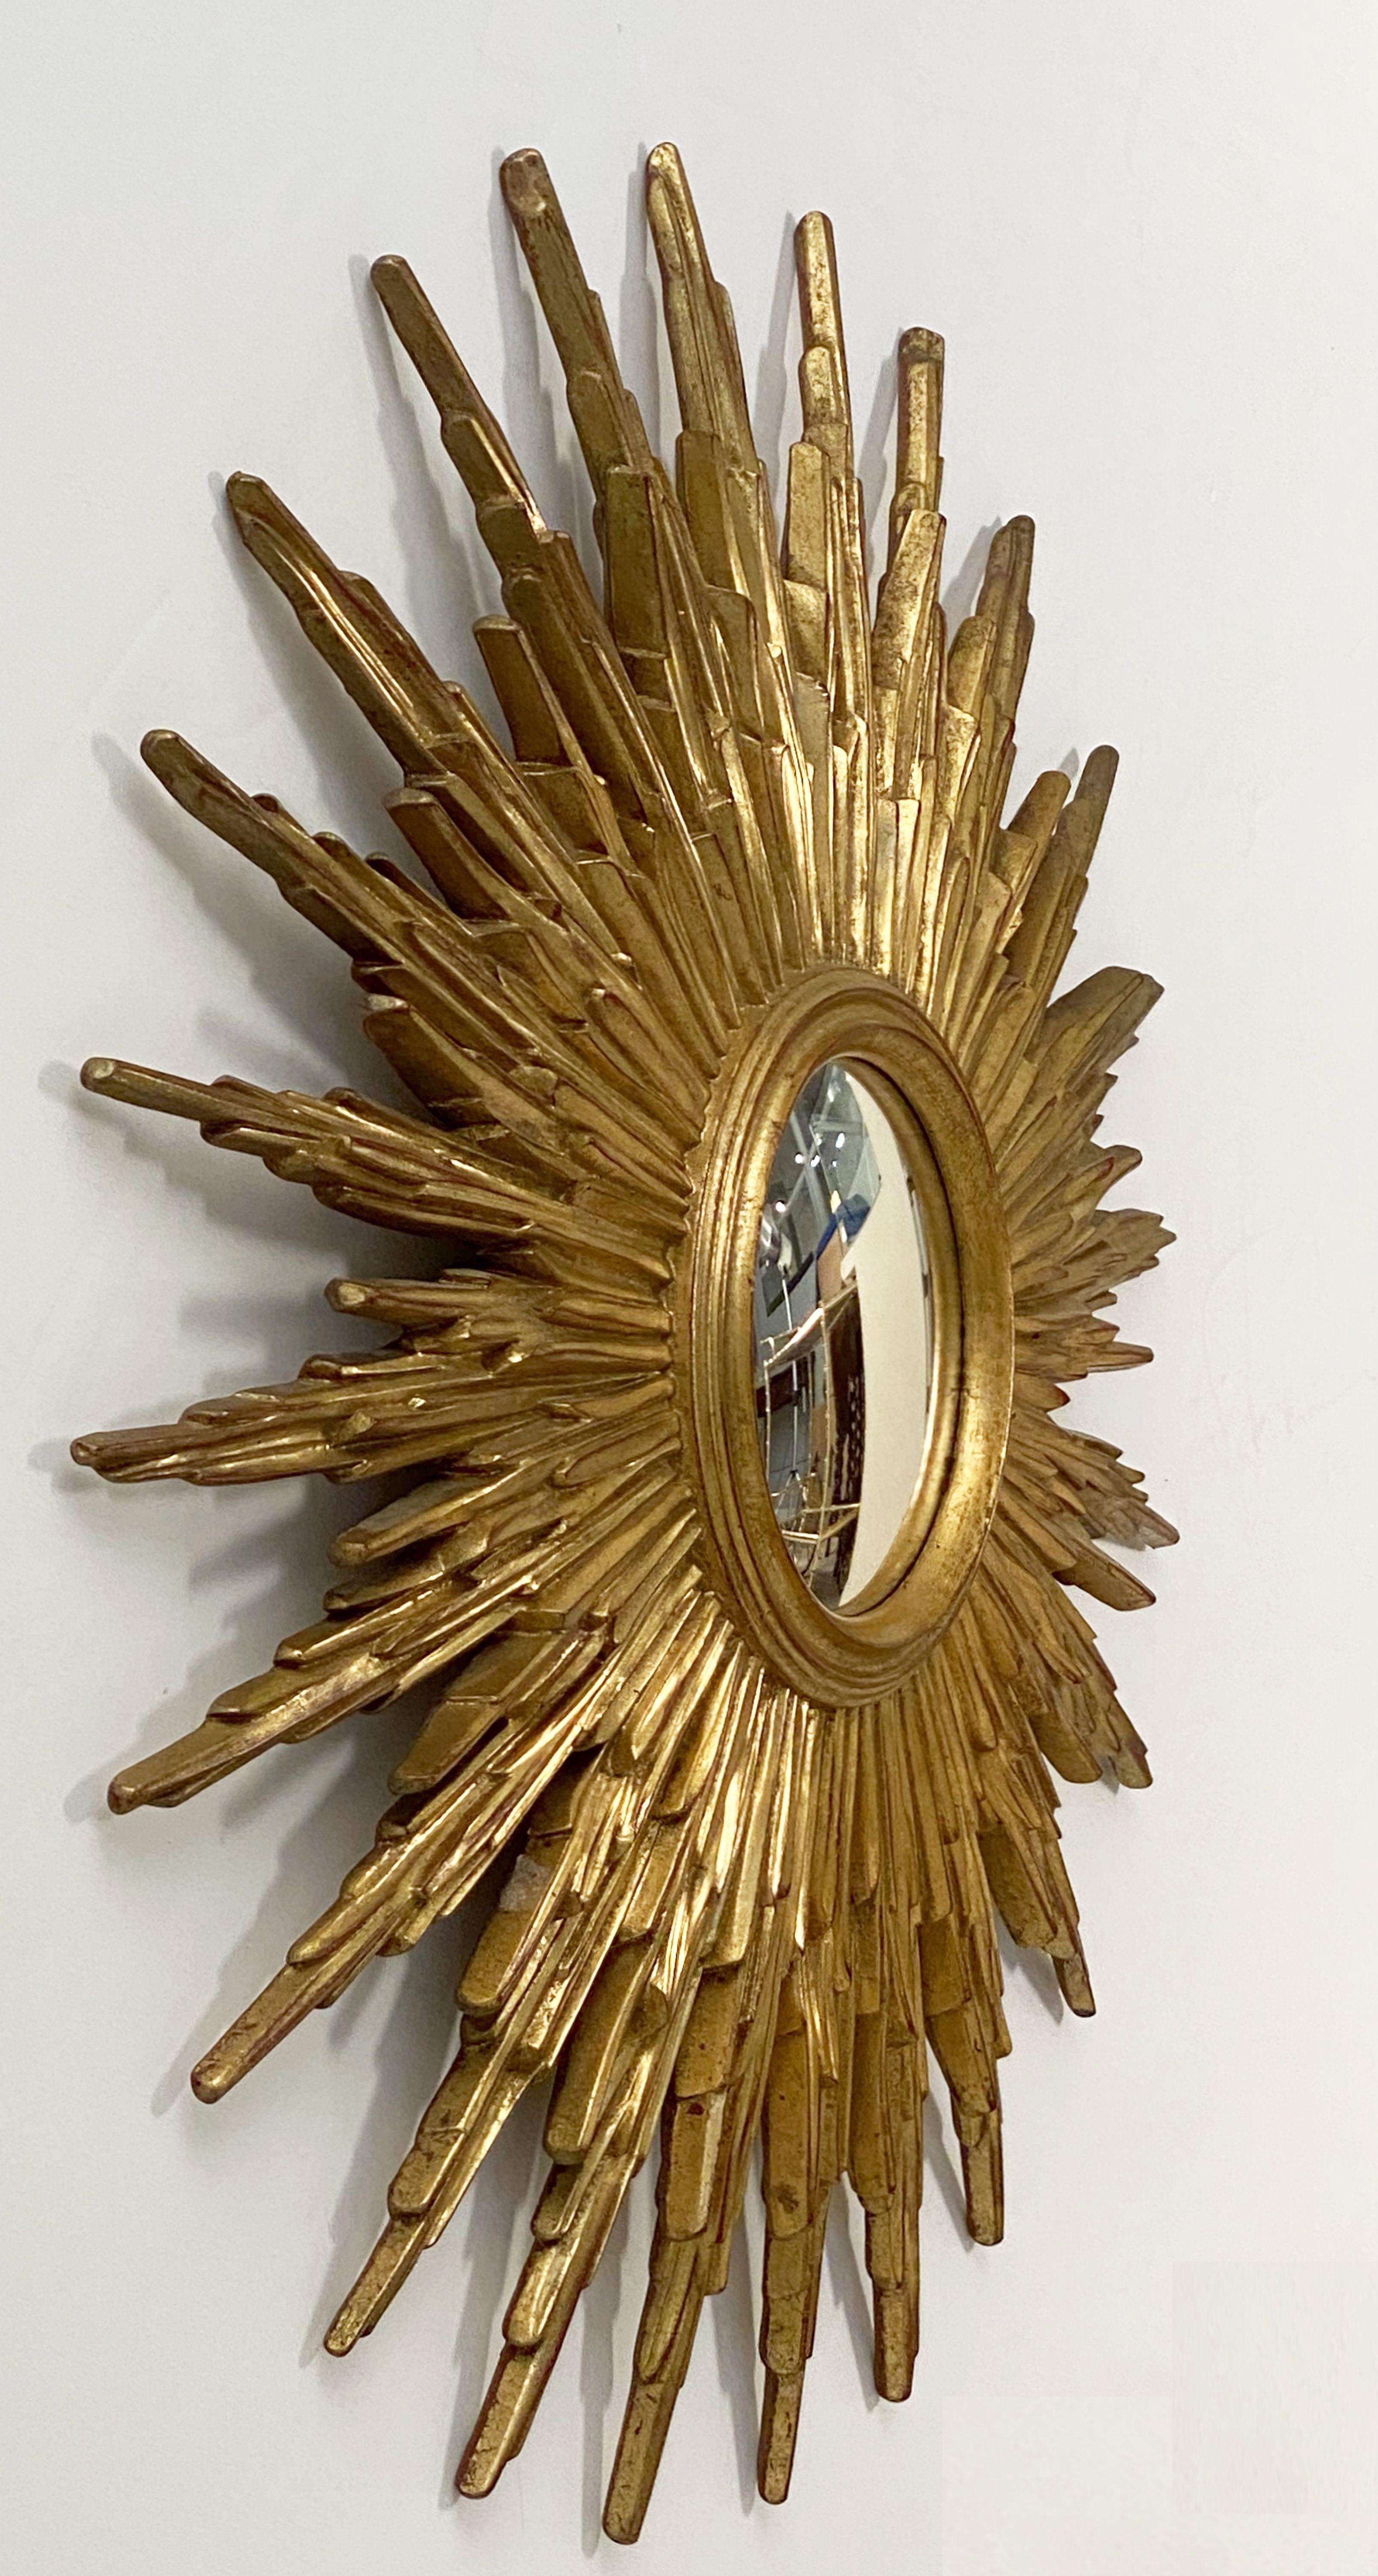 A lovely Belgian gilt sunburst (or starburst) mirror, 31 1/2 inches diameter, with a round, convex mirrored glass centre in moulded gilt resin frame.

 